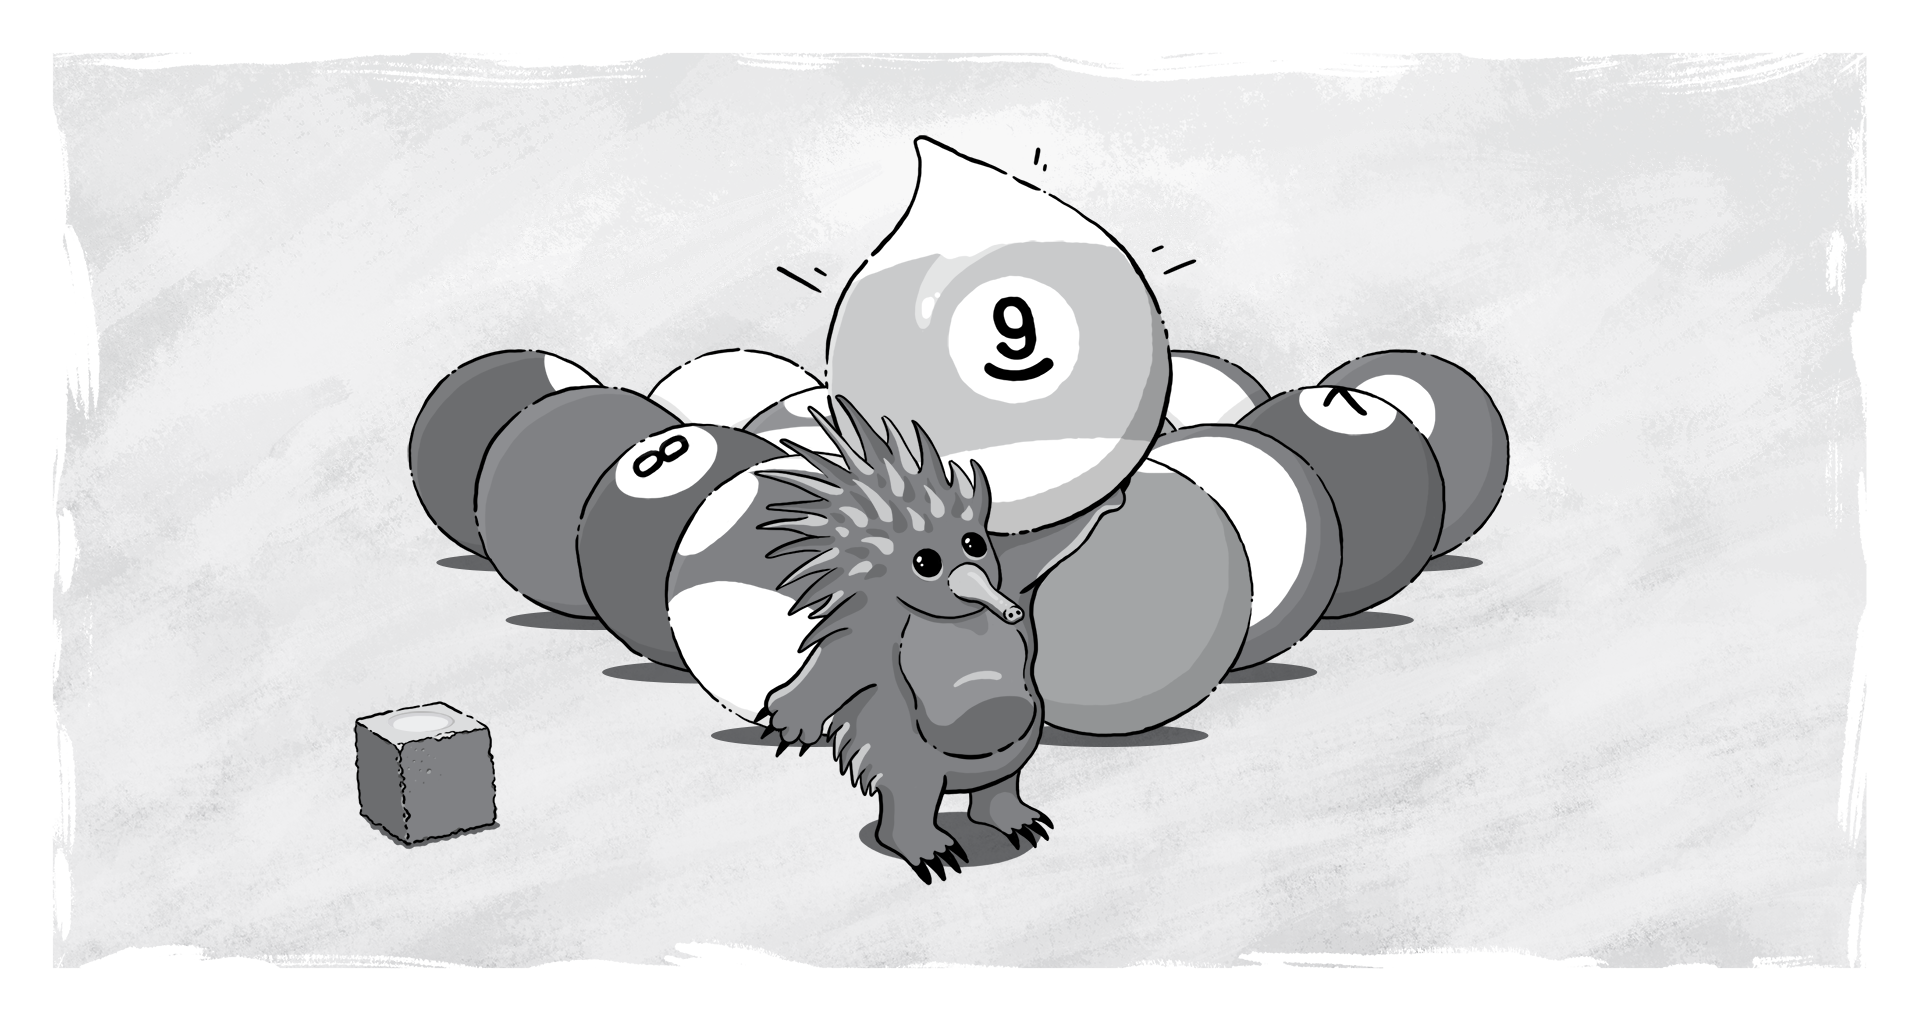 Echidna with Drupal 9 ball from a game of pool